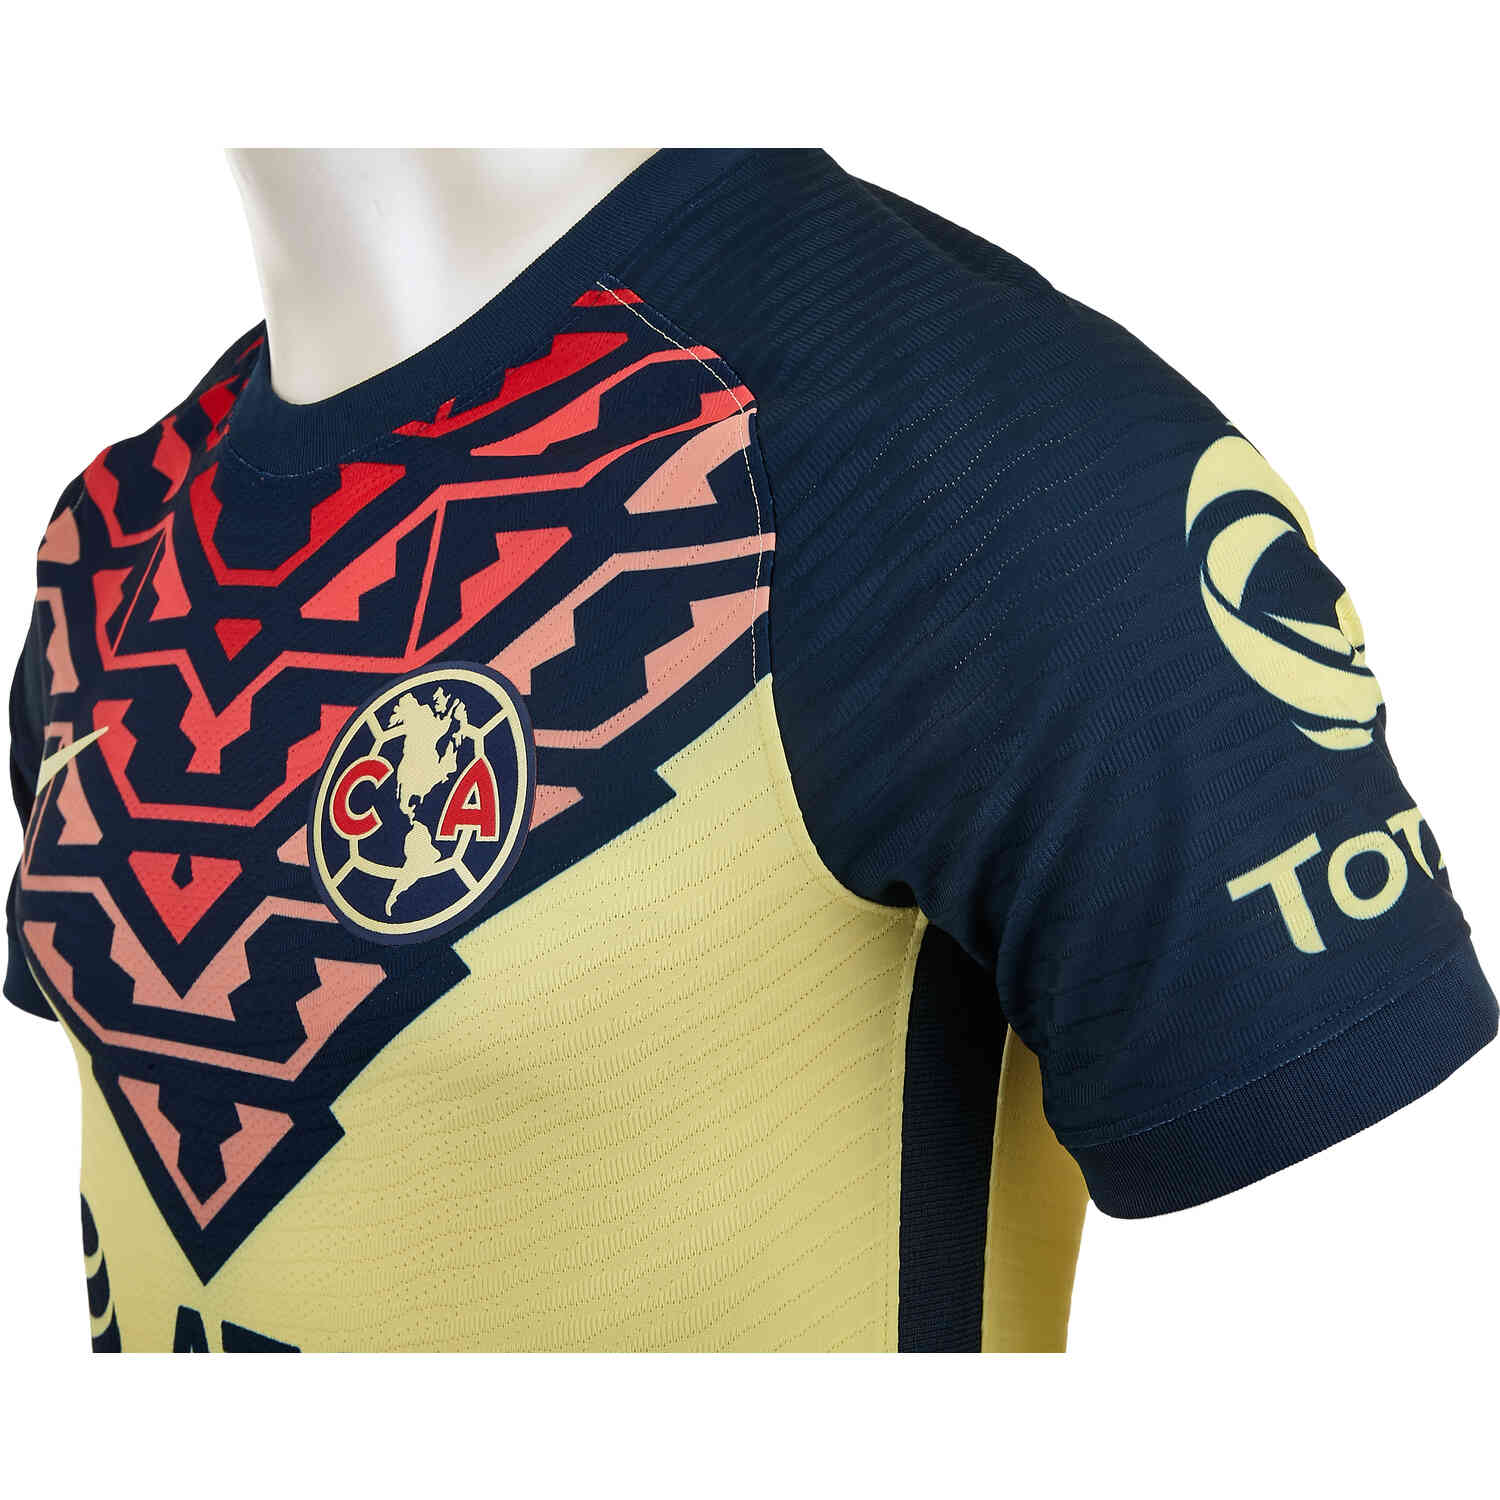 Details about   New 2021-2022 Club America training Soccer jersey Short Sleeves Shirt Size S-XXL 